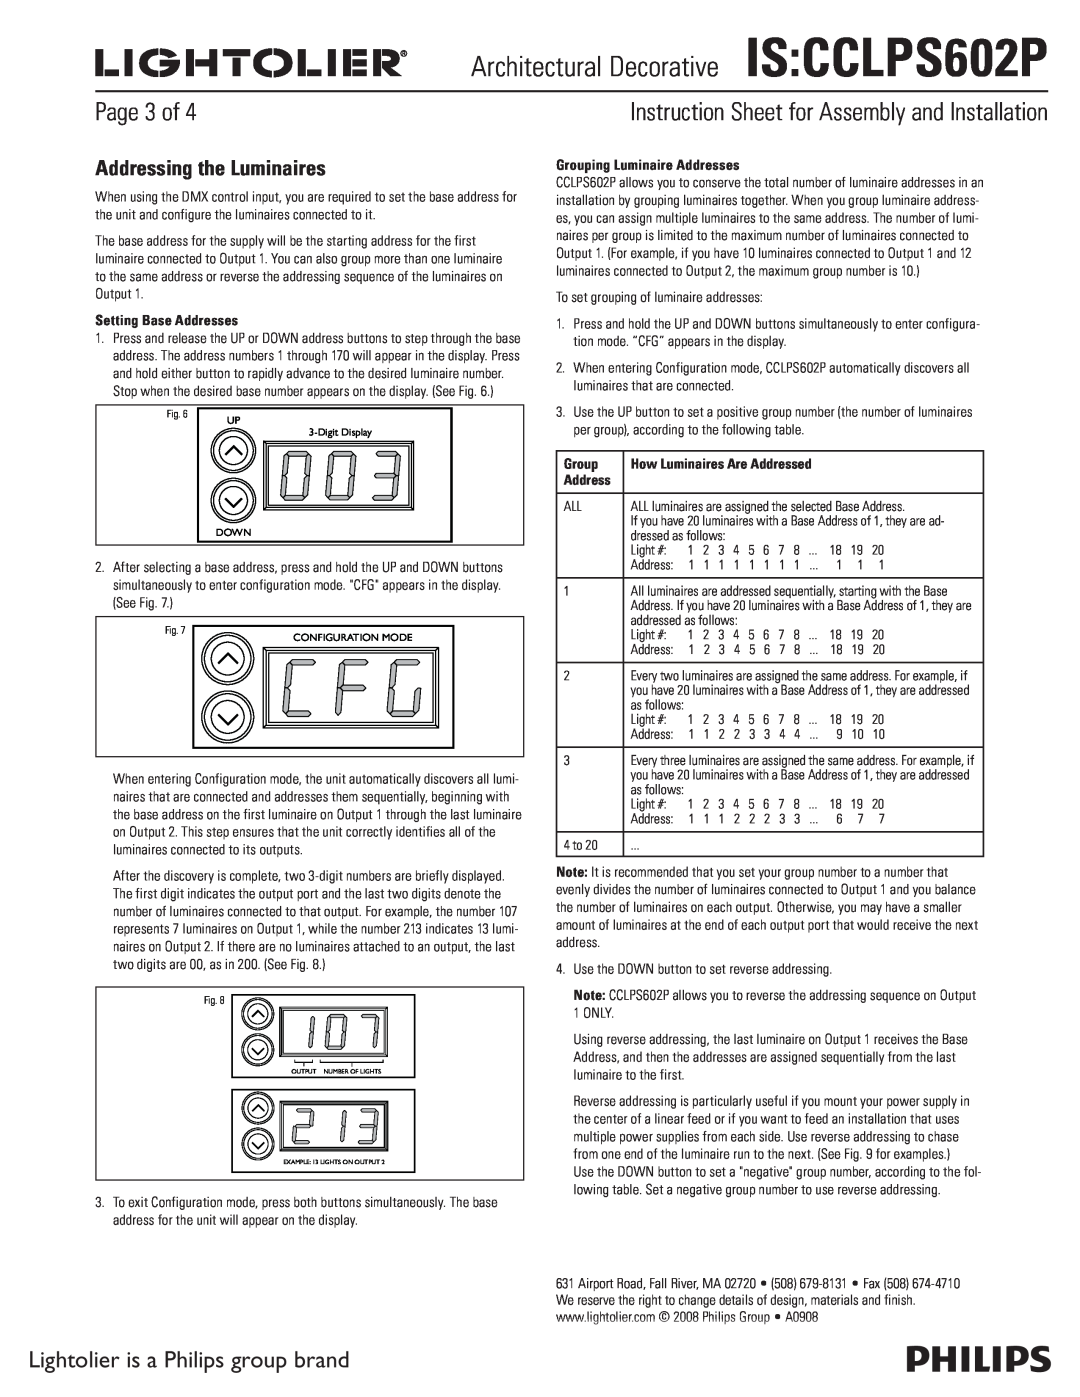 Lightolier IS:CCLPS602P instruction sheet Page 3 of, Addressing the Luminaires, Architectural DecorativeIS CCLPS602P 